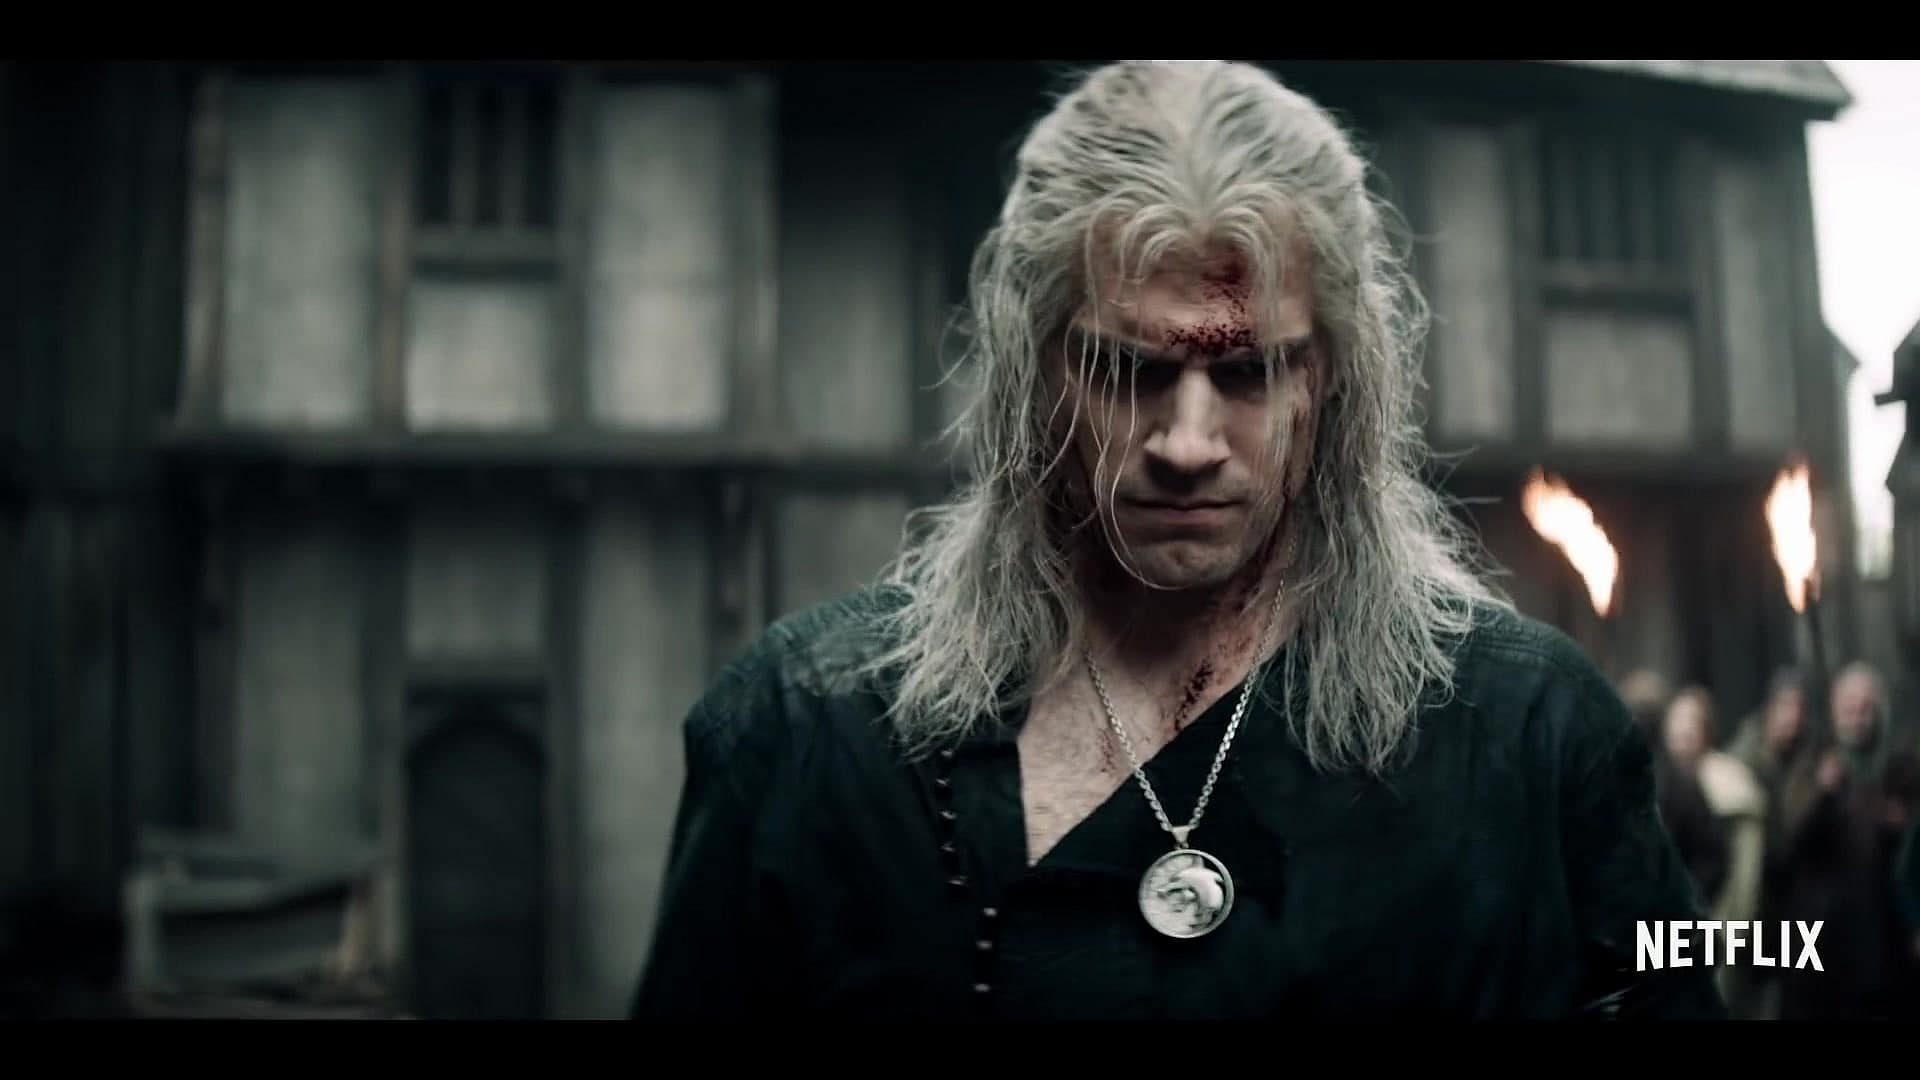 Netflix’s The Witcher Showrunner Reveals the Greatest Challenge In Series Adaptation